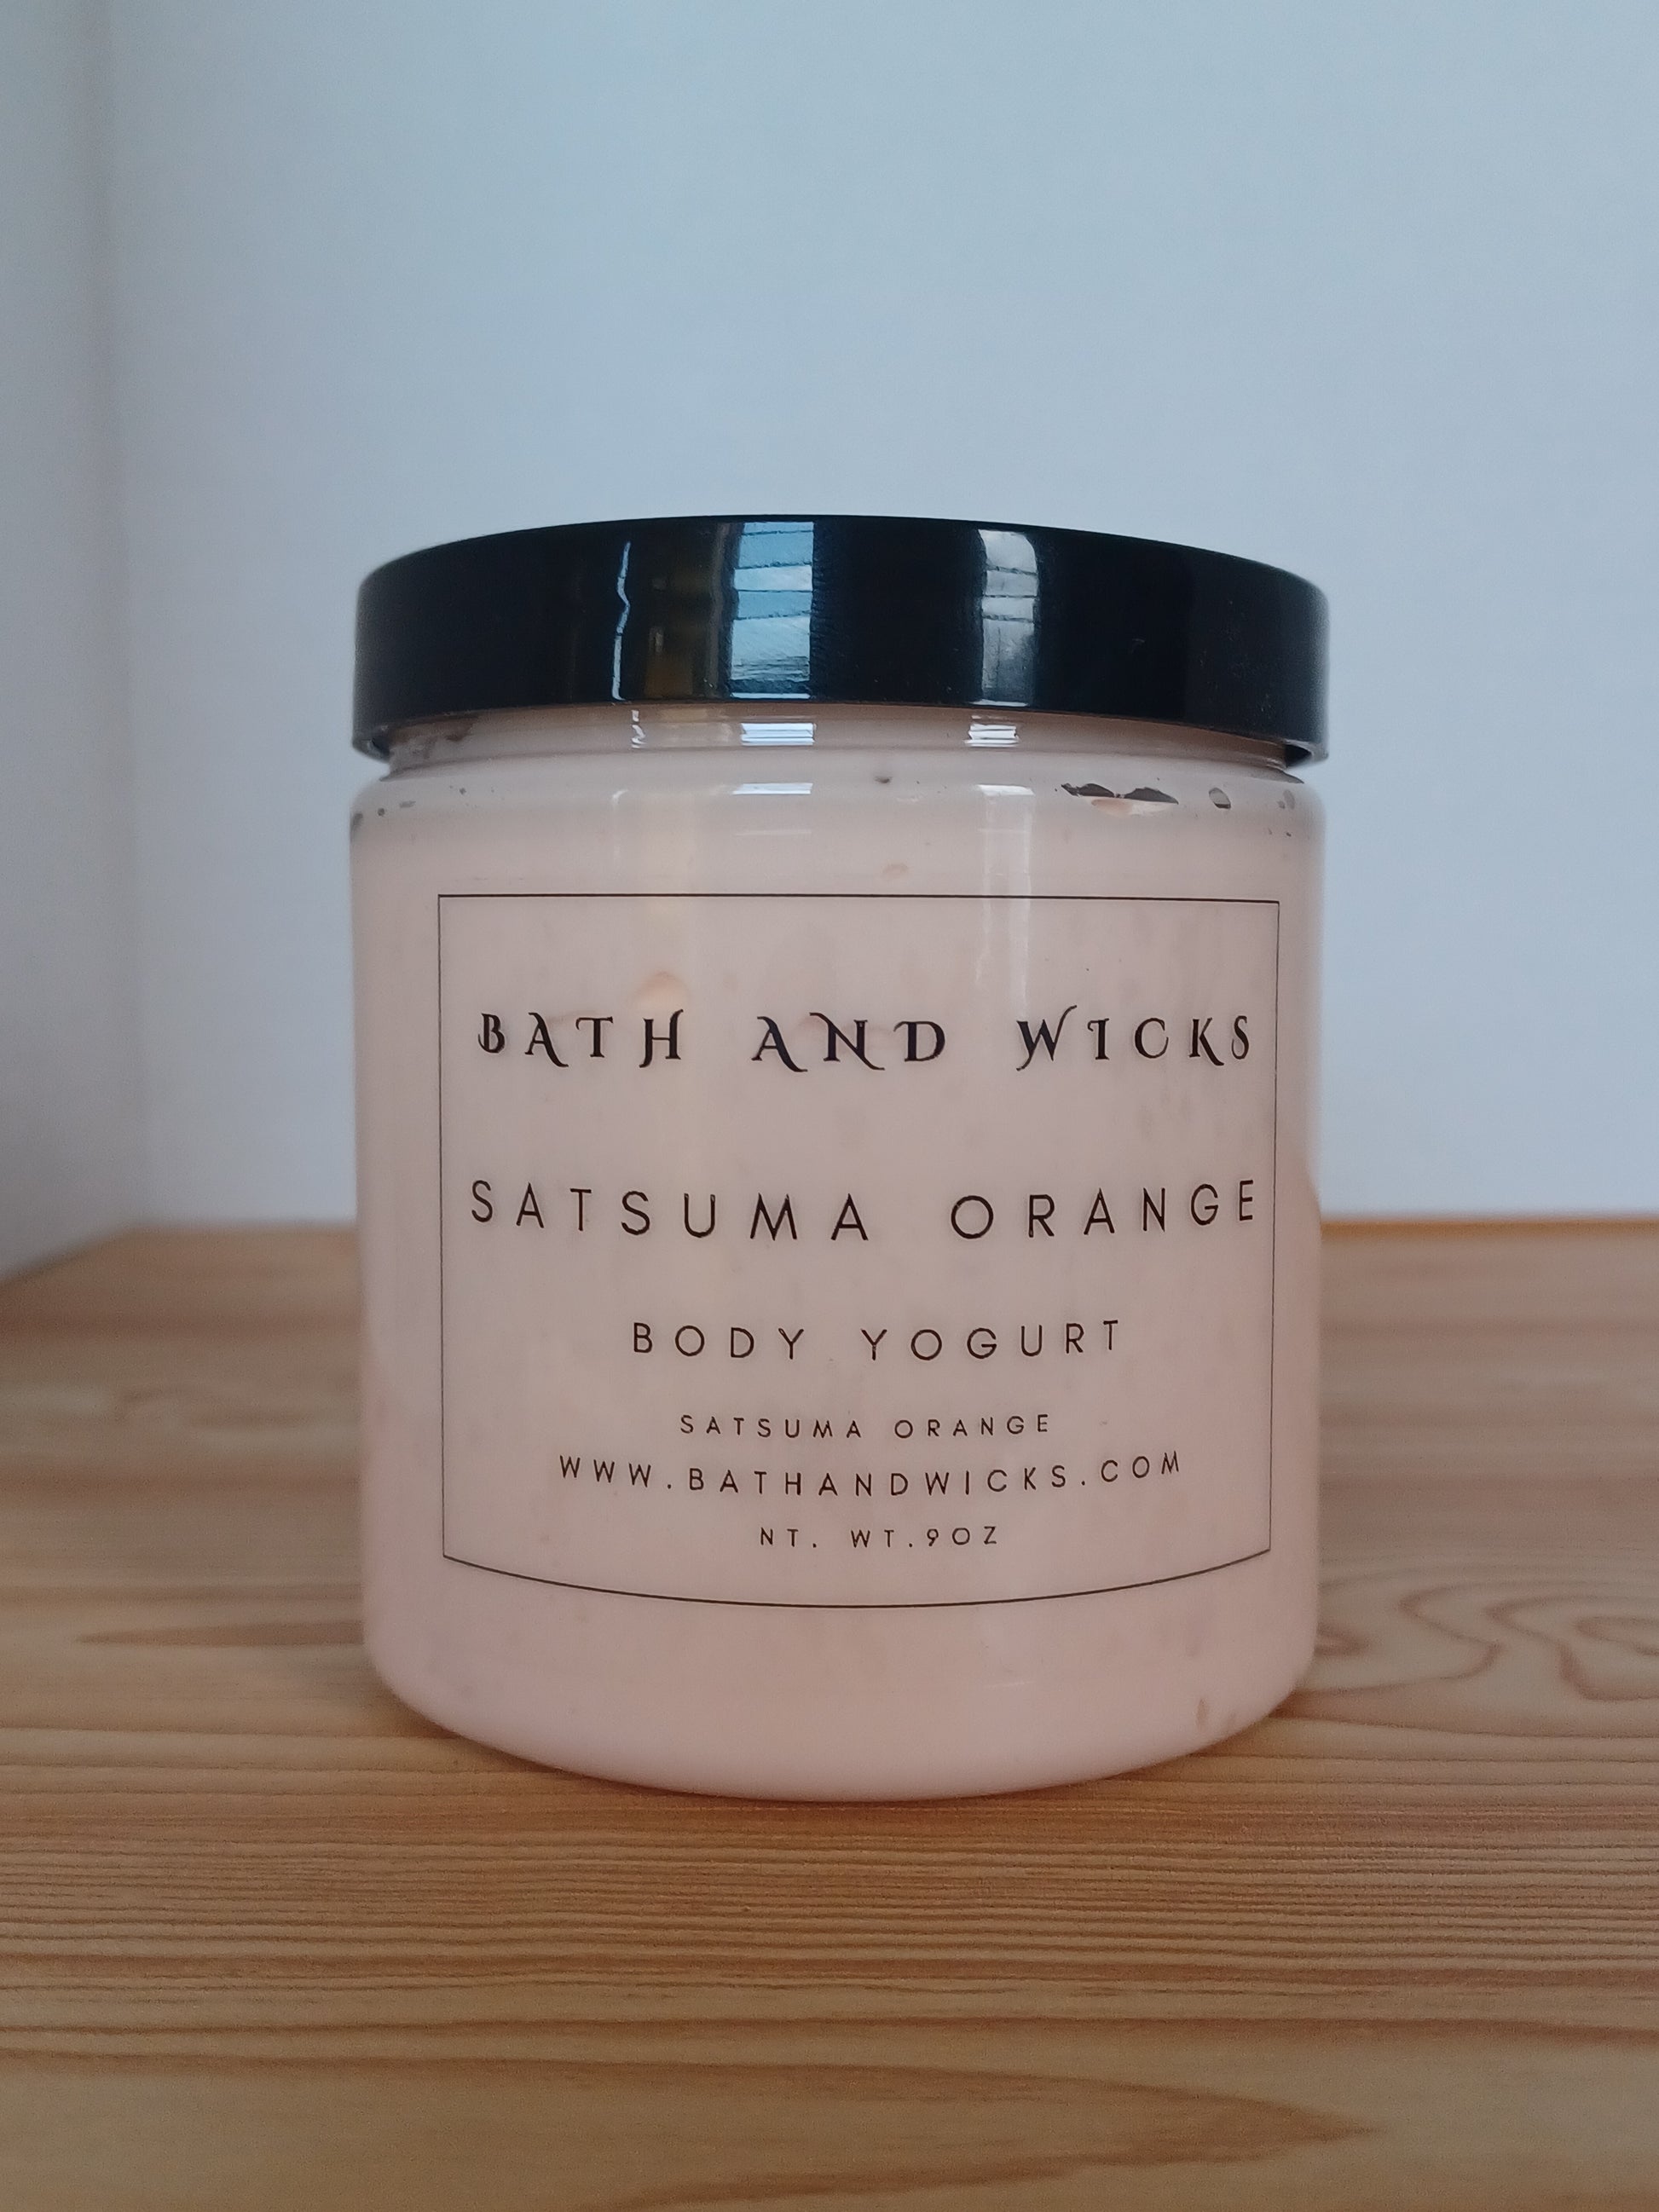 Luxurious thick and creamy body yogurt. This one has a nice orange color and is scented with Satsuma Orange fragrance oil.